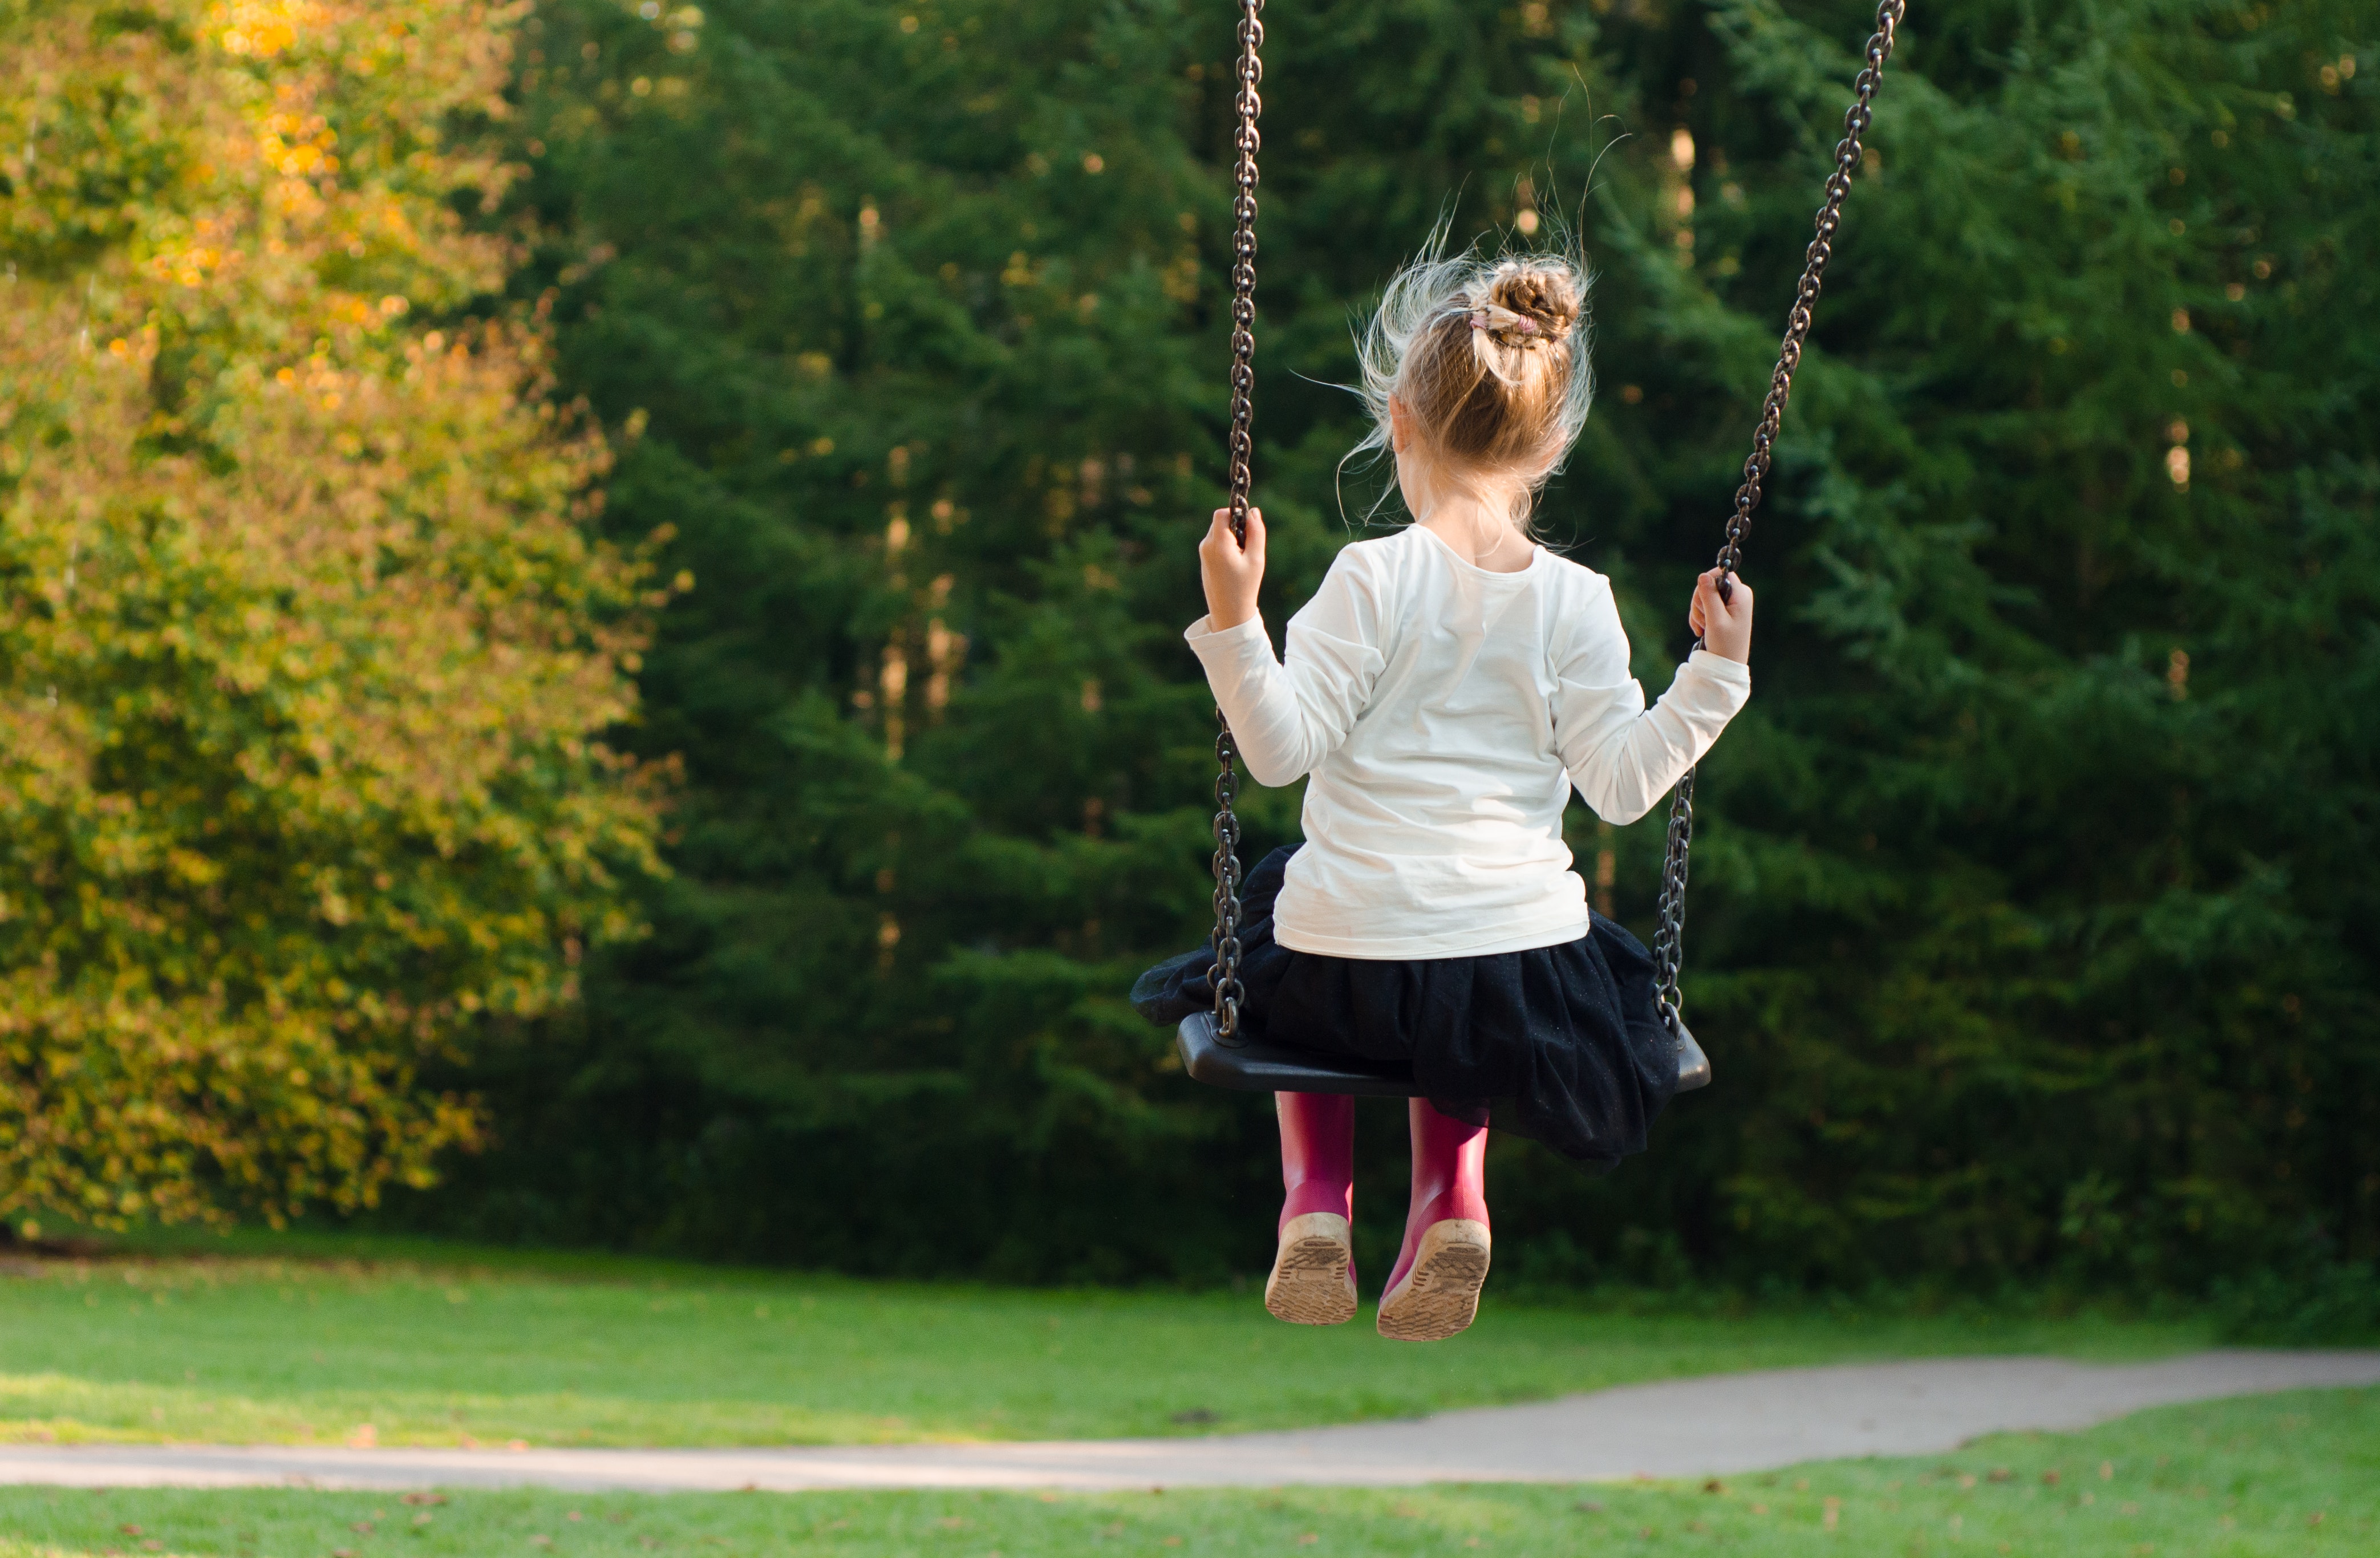 miscellanea, miscellaneous, girl, swing, child, happiness, childhood